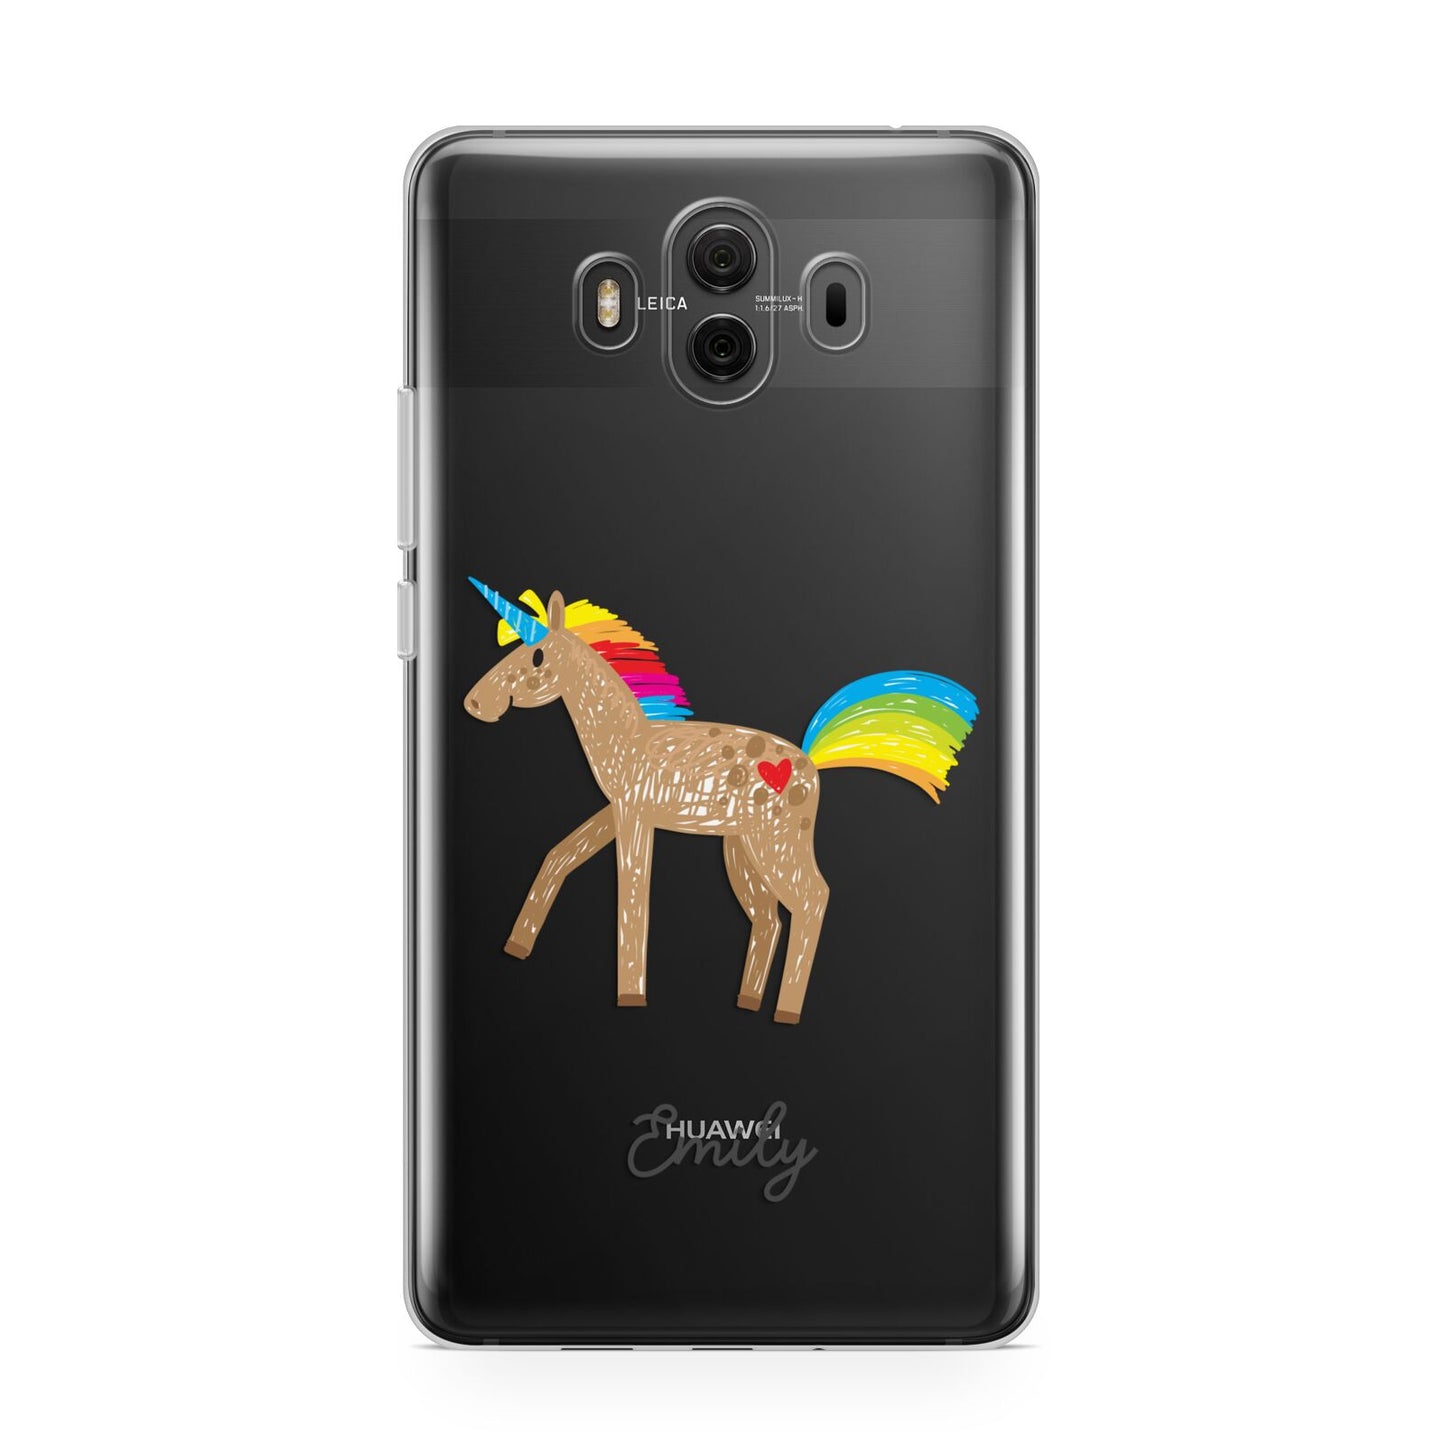 Personalised Unicorn with Name Huawei Mate 10 Protective Phone Case